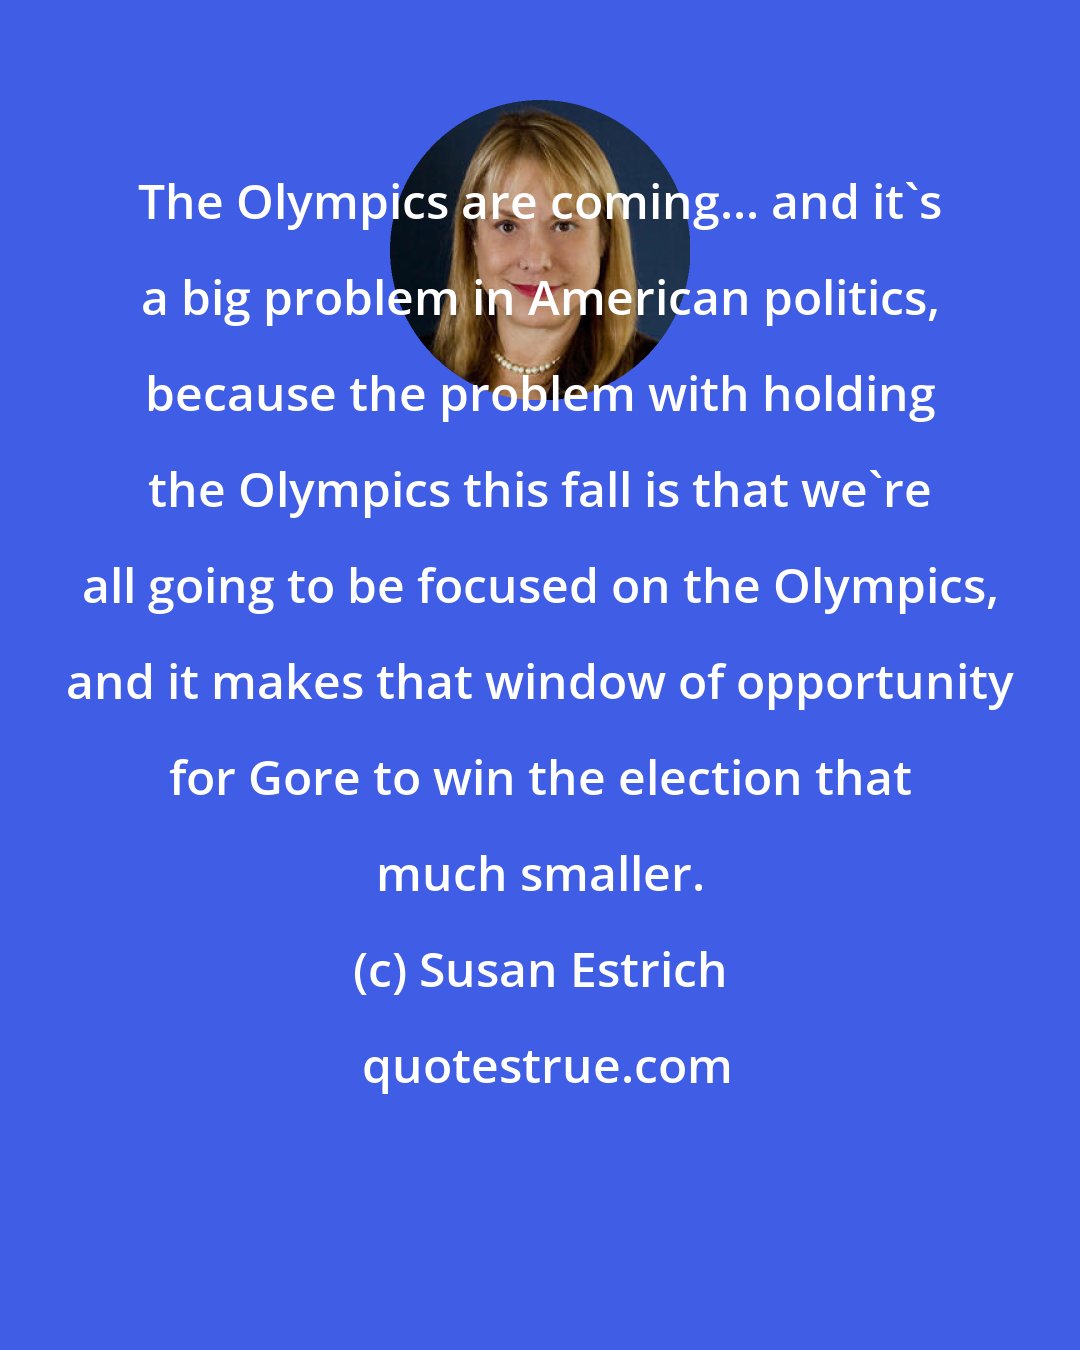 Susan Estrich: The Olympics are coming... and it's a big problem in American politics, because the problem with holding the Olympics this fall is that we're all going to be focused on the Olympics, and it makes that window of opportunity for Gore to win the election that much smaller.